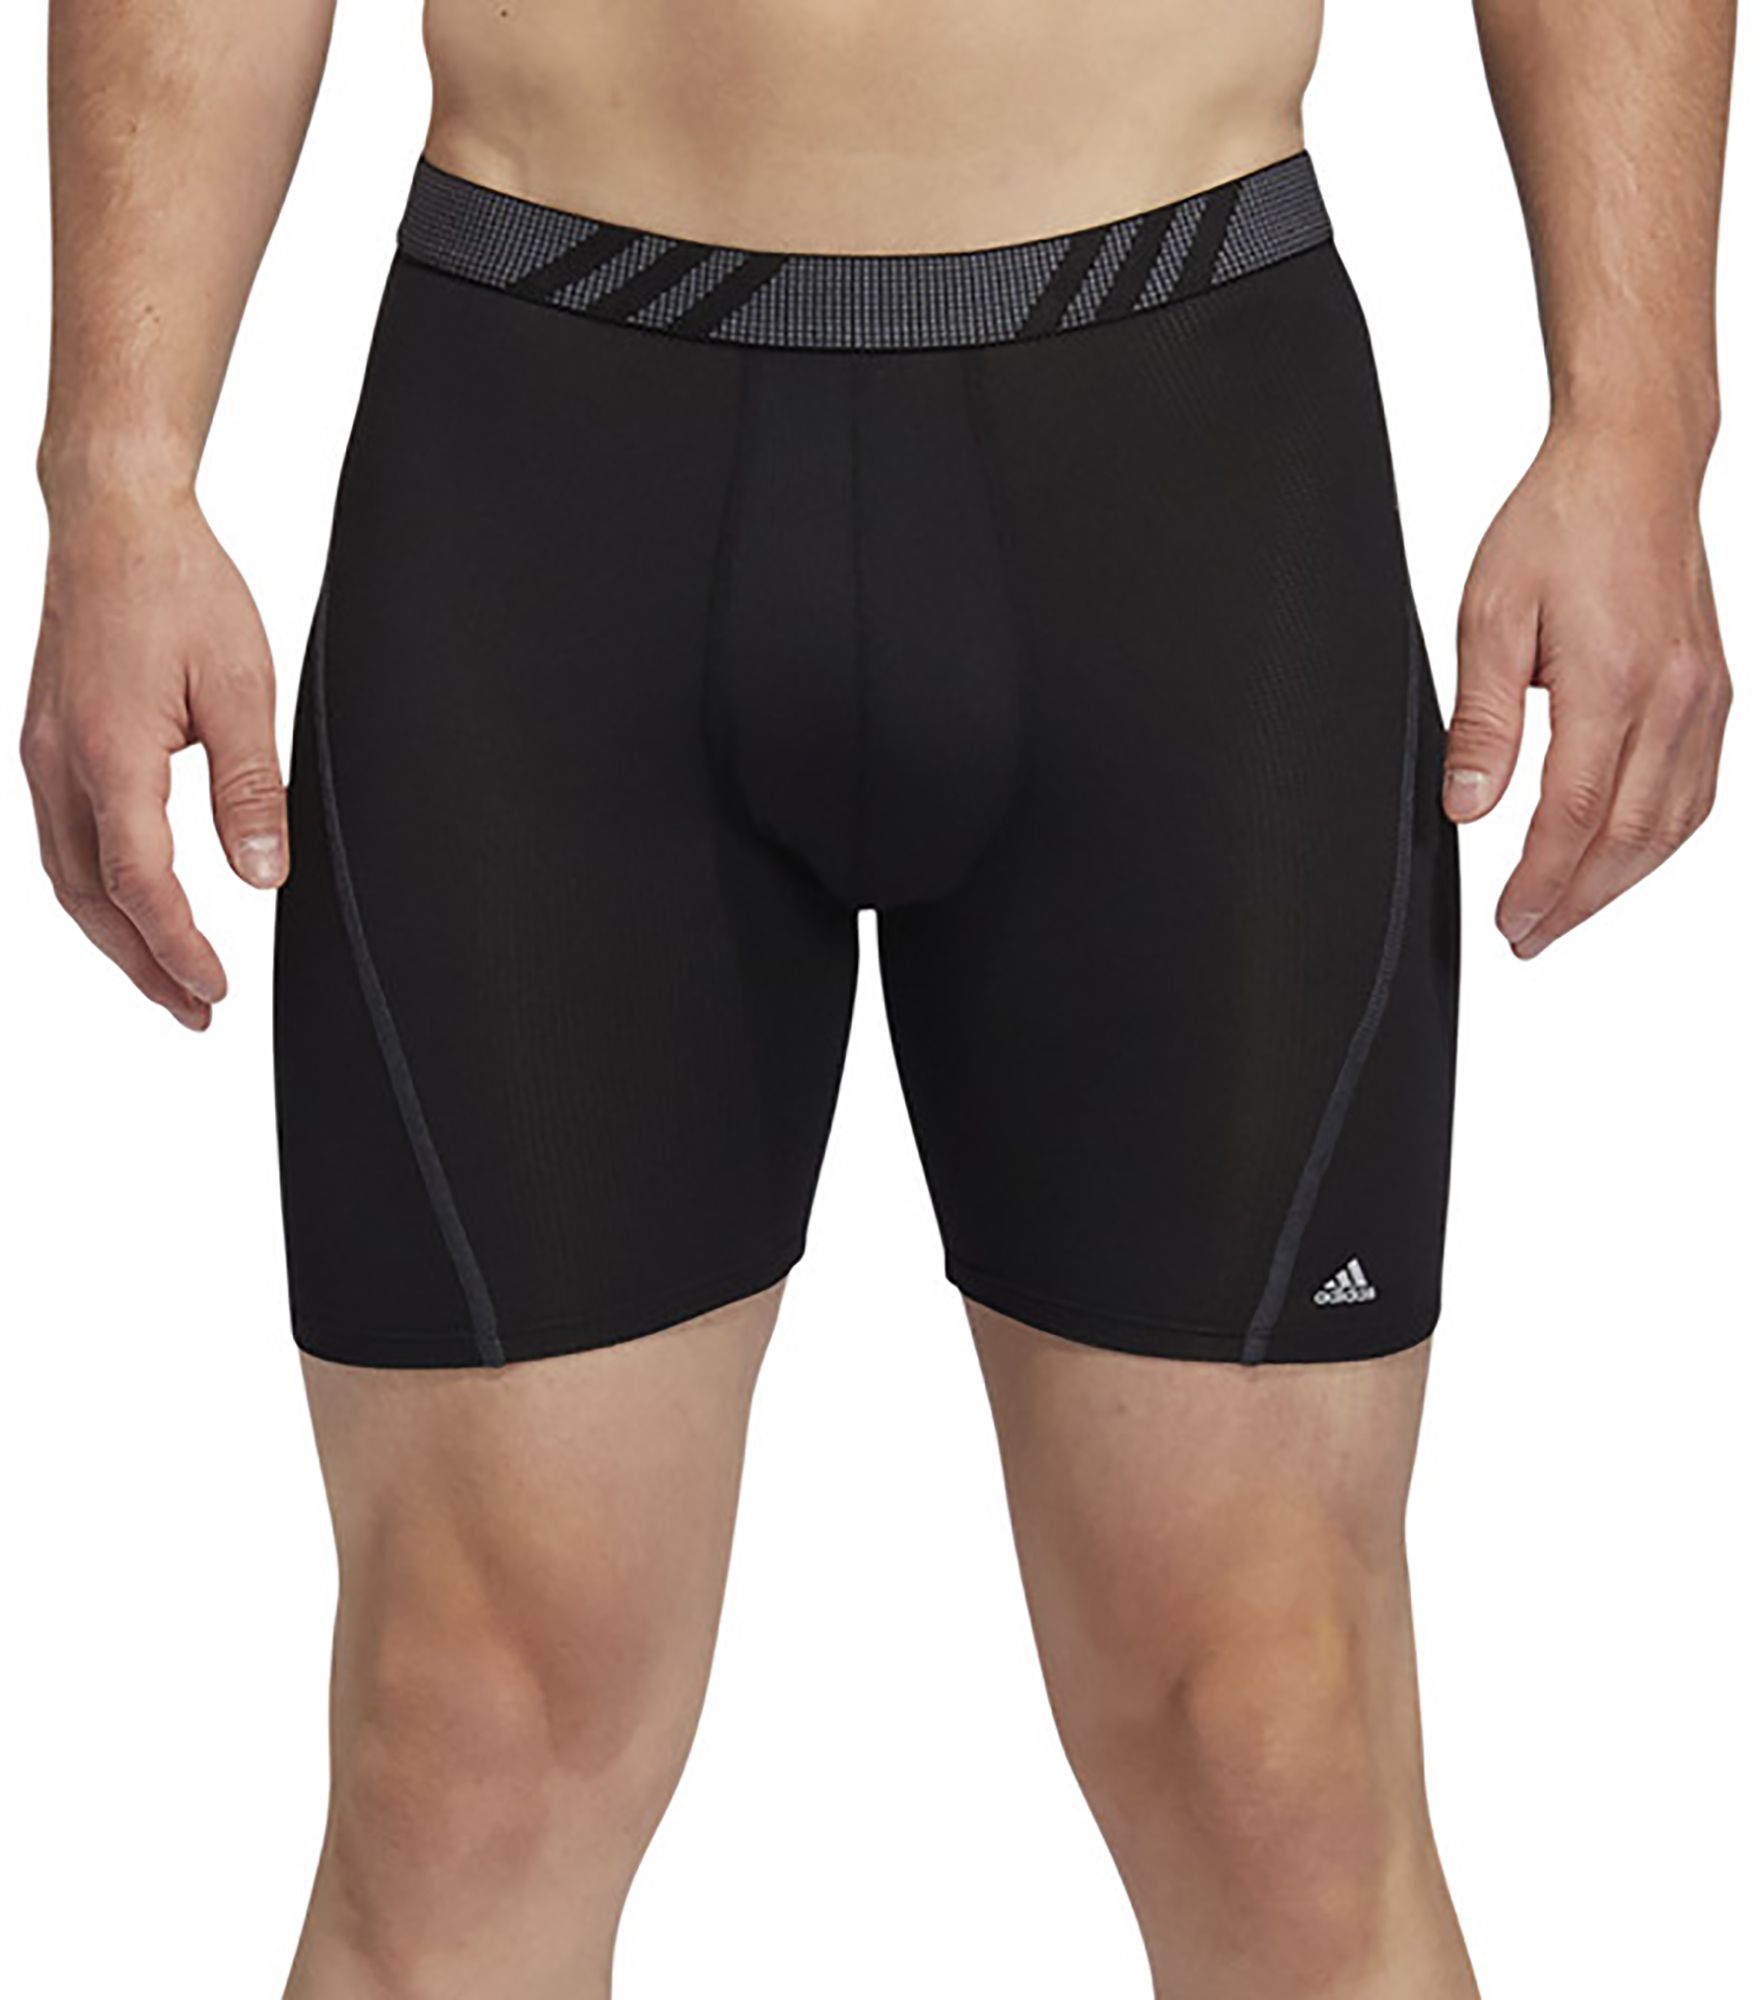 adidas boxers 3 pack